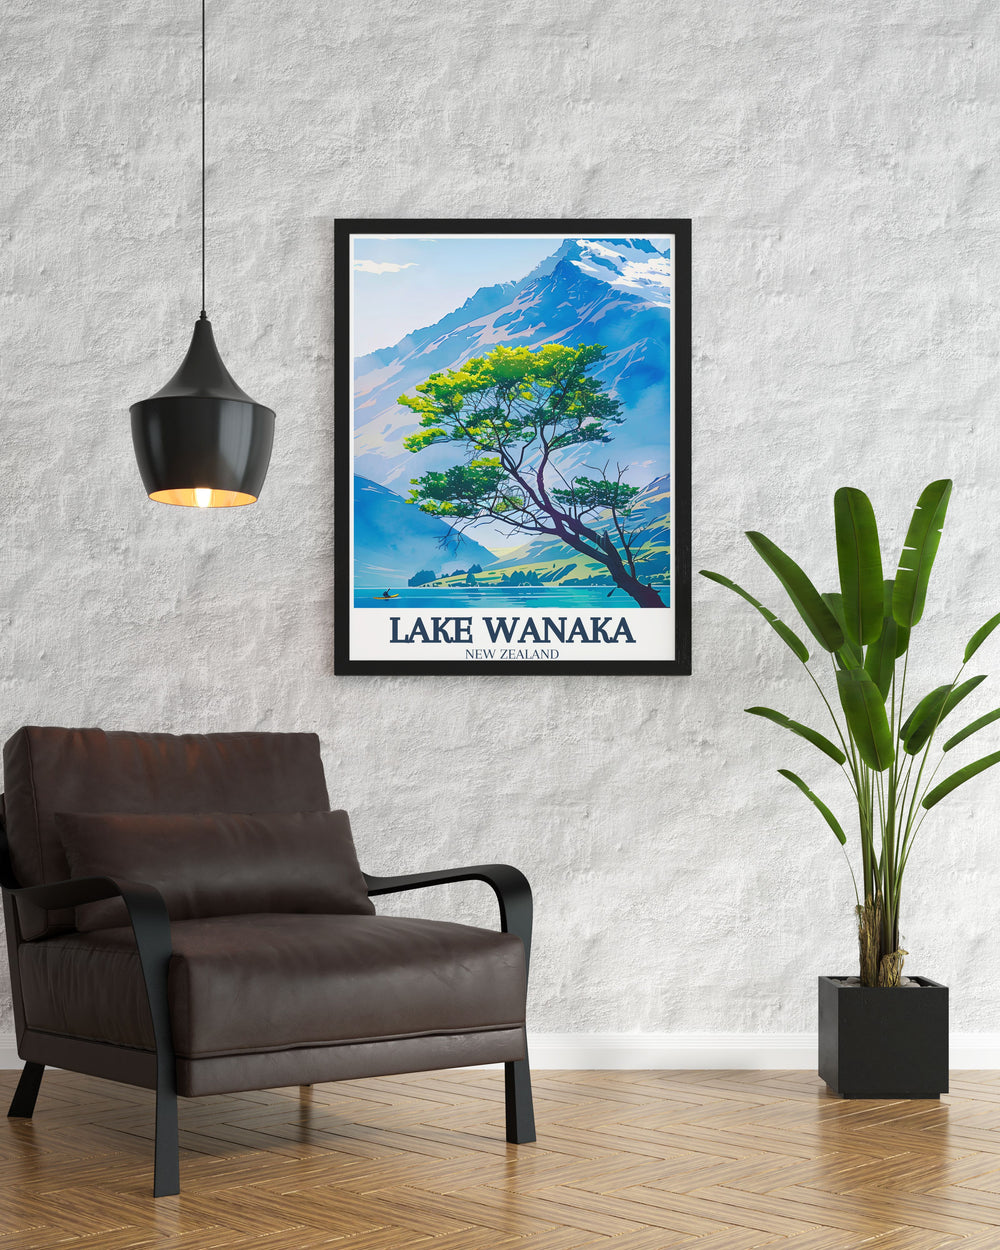 Elegant Lake Wanaka poster showcasing the serene lake wanaka tree in Mount Aspiring National Park A striking piece of New Zealand wall art that brings the beauty of nature into your living space